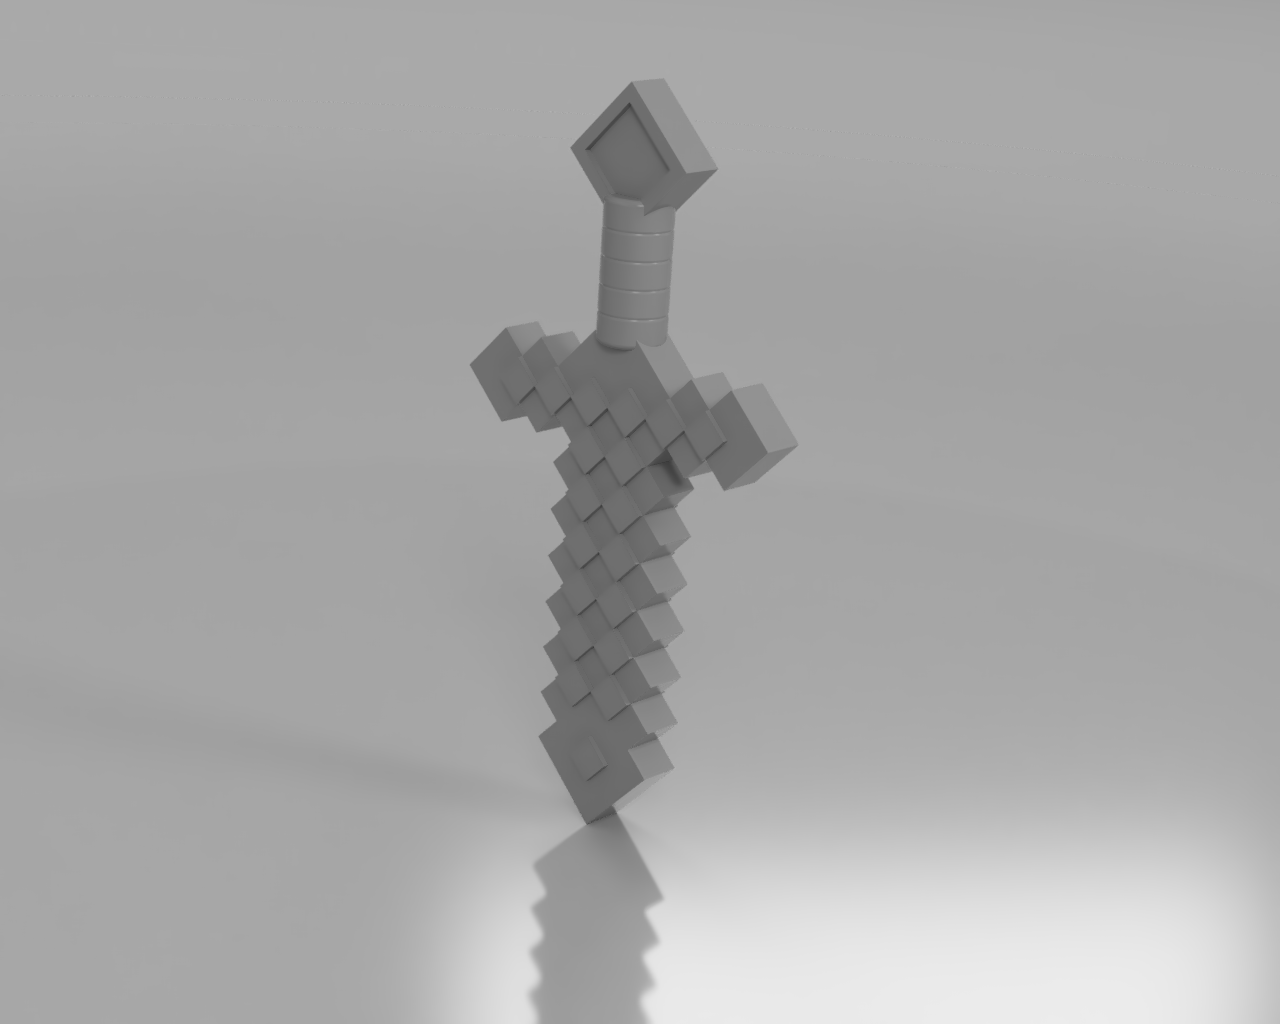 Minecraft Lego Sword (Scalable for human use!)